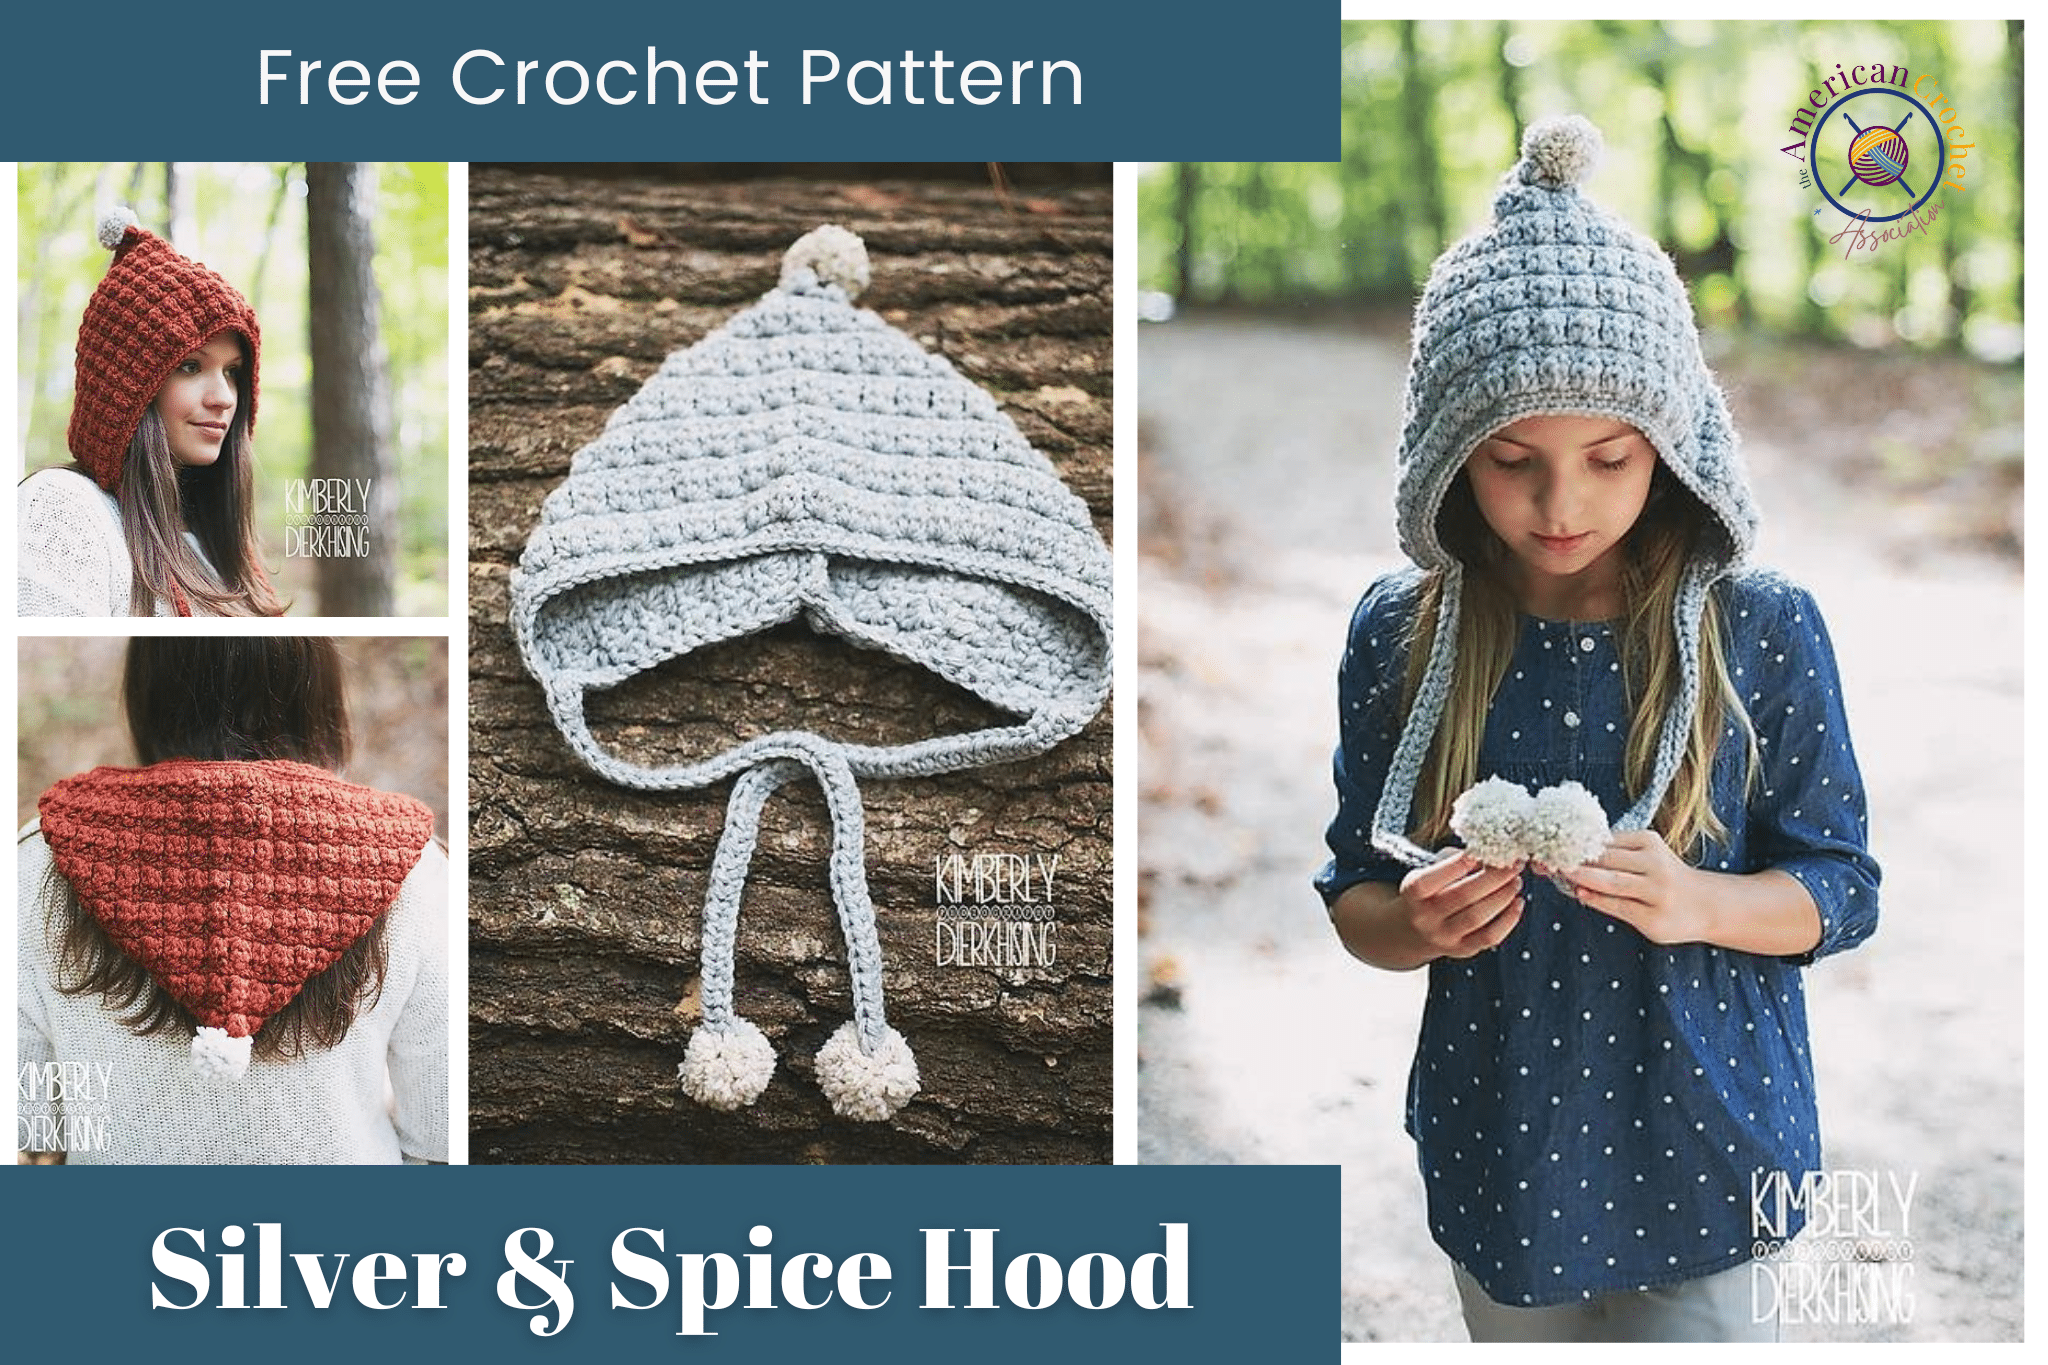 Silver and spice colored crochet hoods